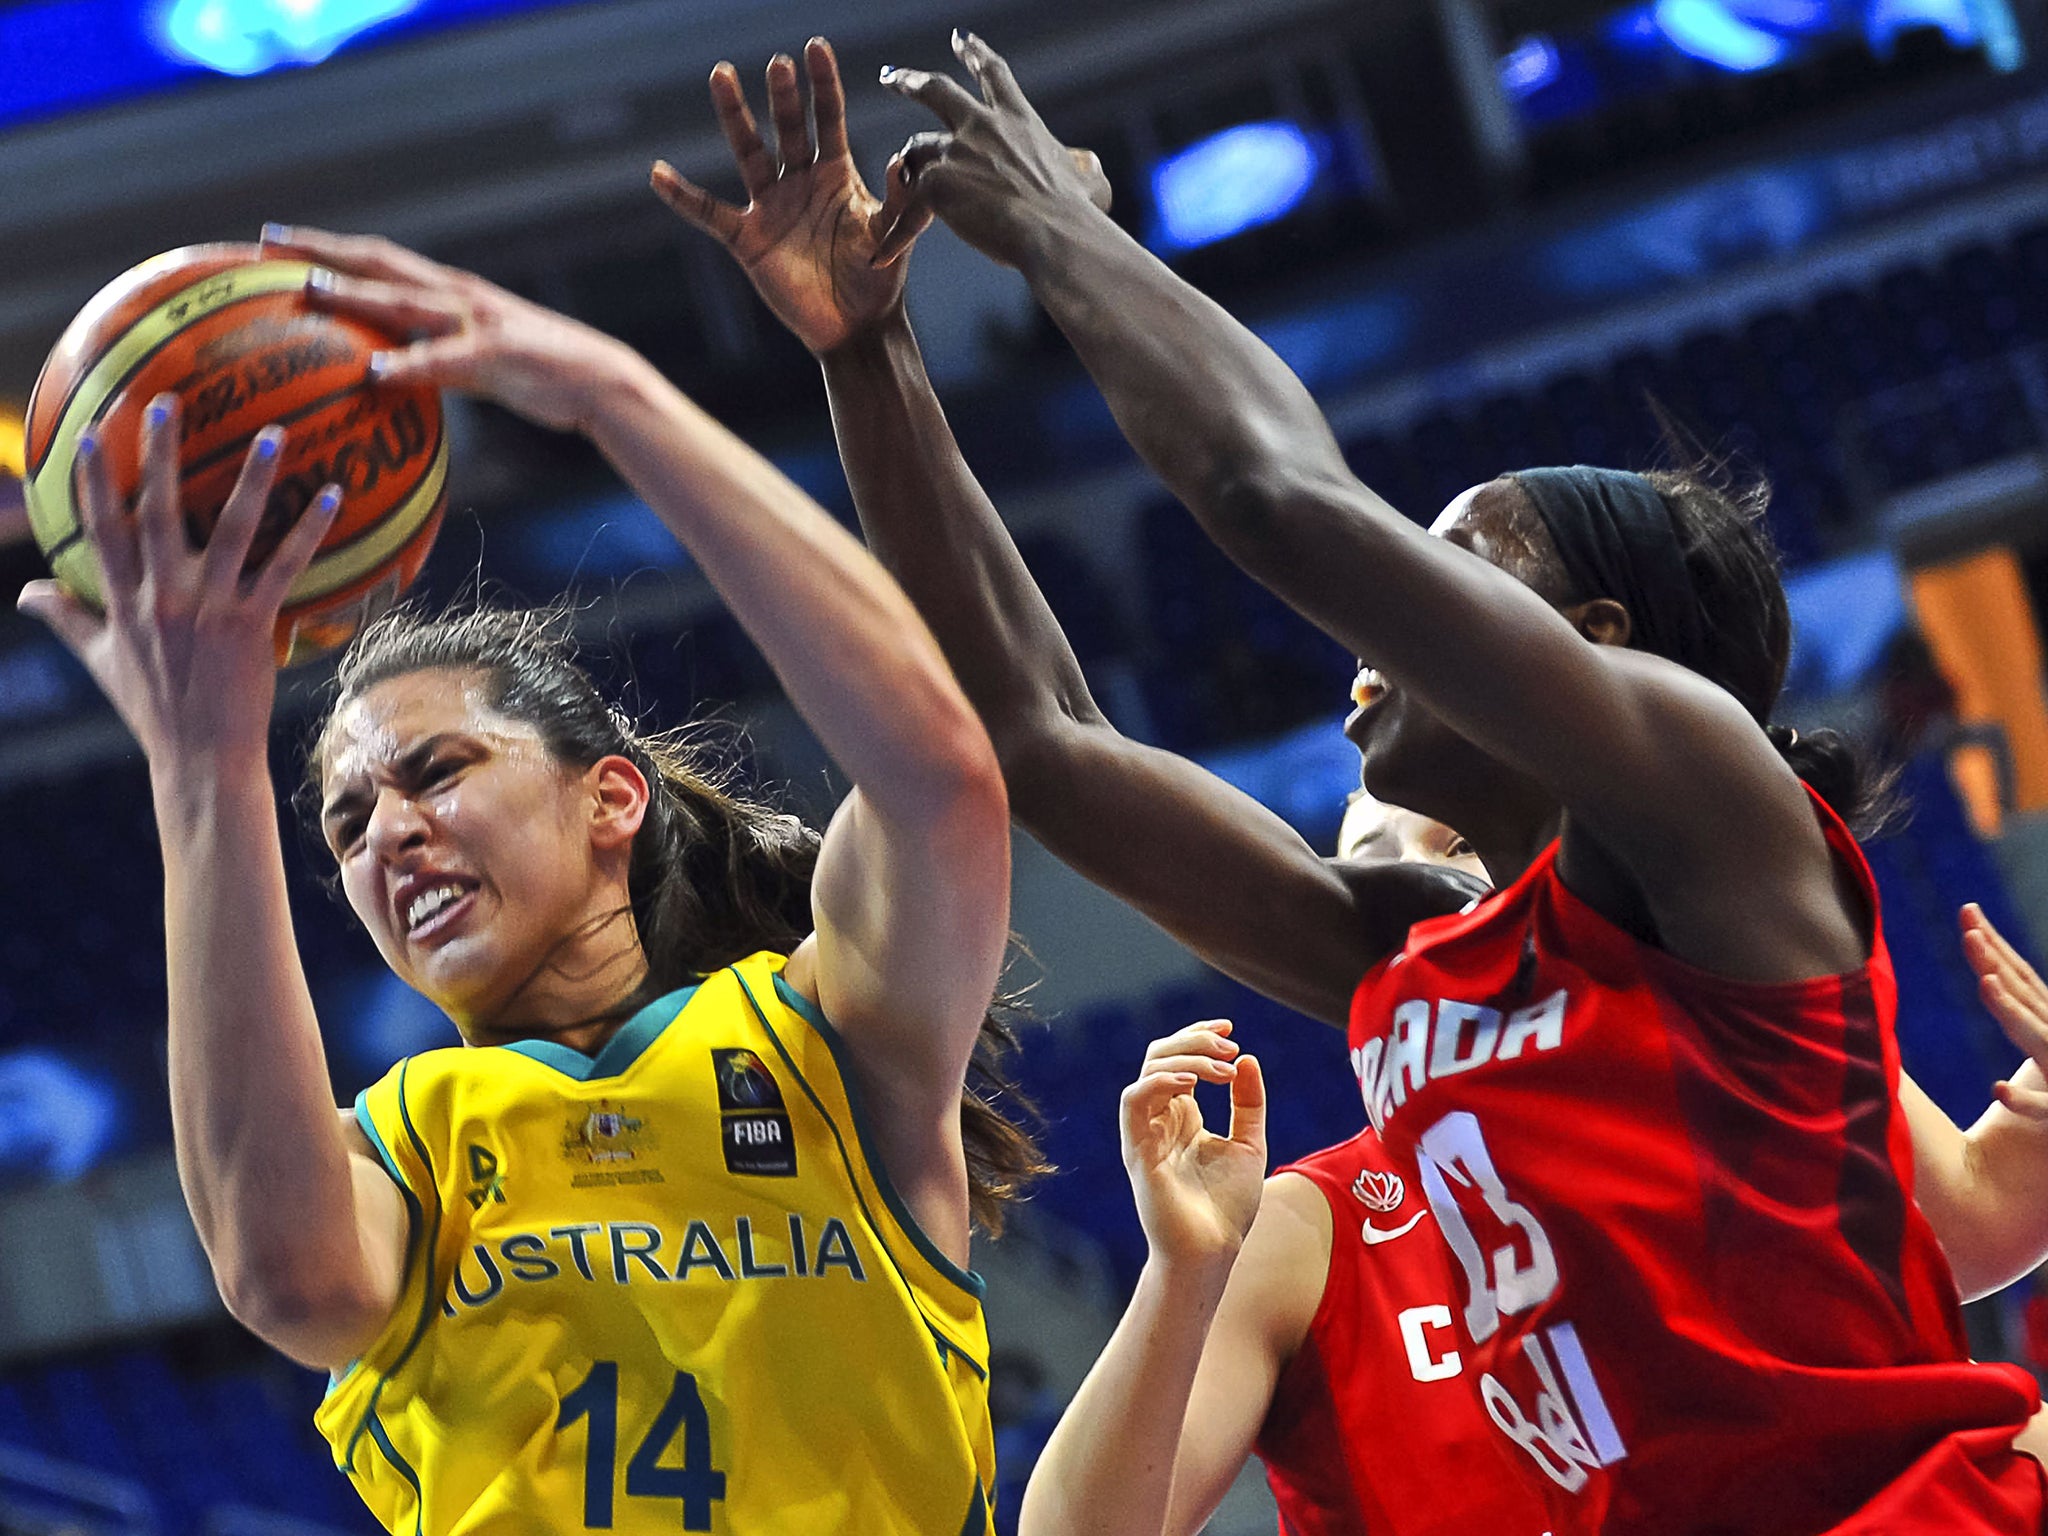 Australia's Marianna Tolo (L) vies for the ball with Canada's Tamara Tatham (R) during the 2014 FIBA Women's World Championships quarter-final basketball match between Australia and Canada at Fenerbahce Ulker Sports Arena in Istanbul